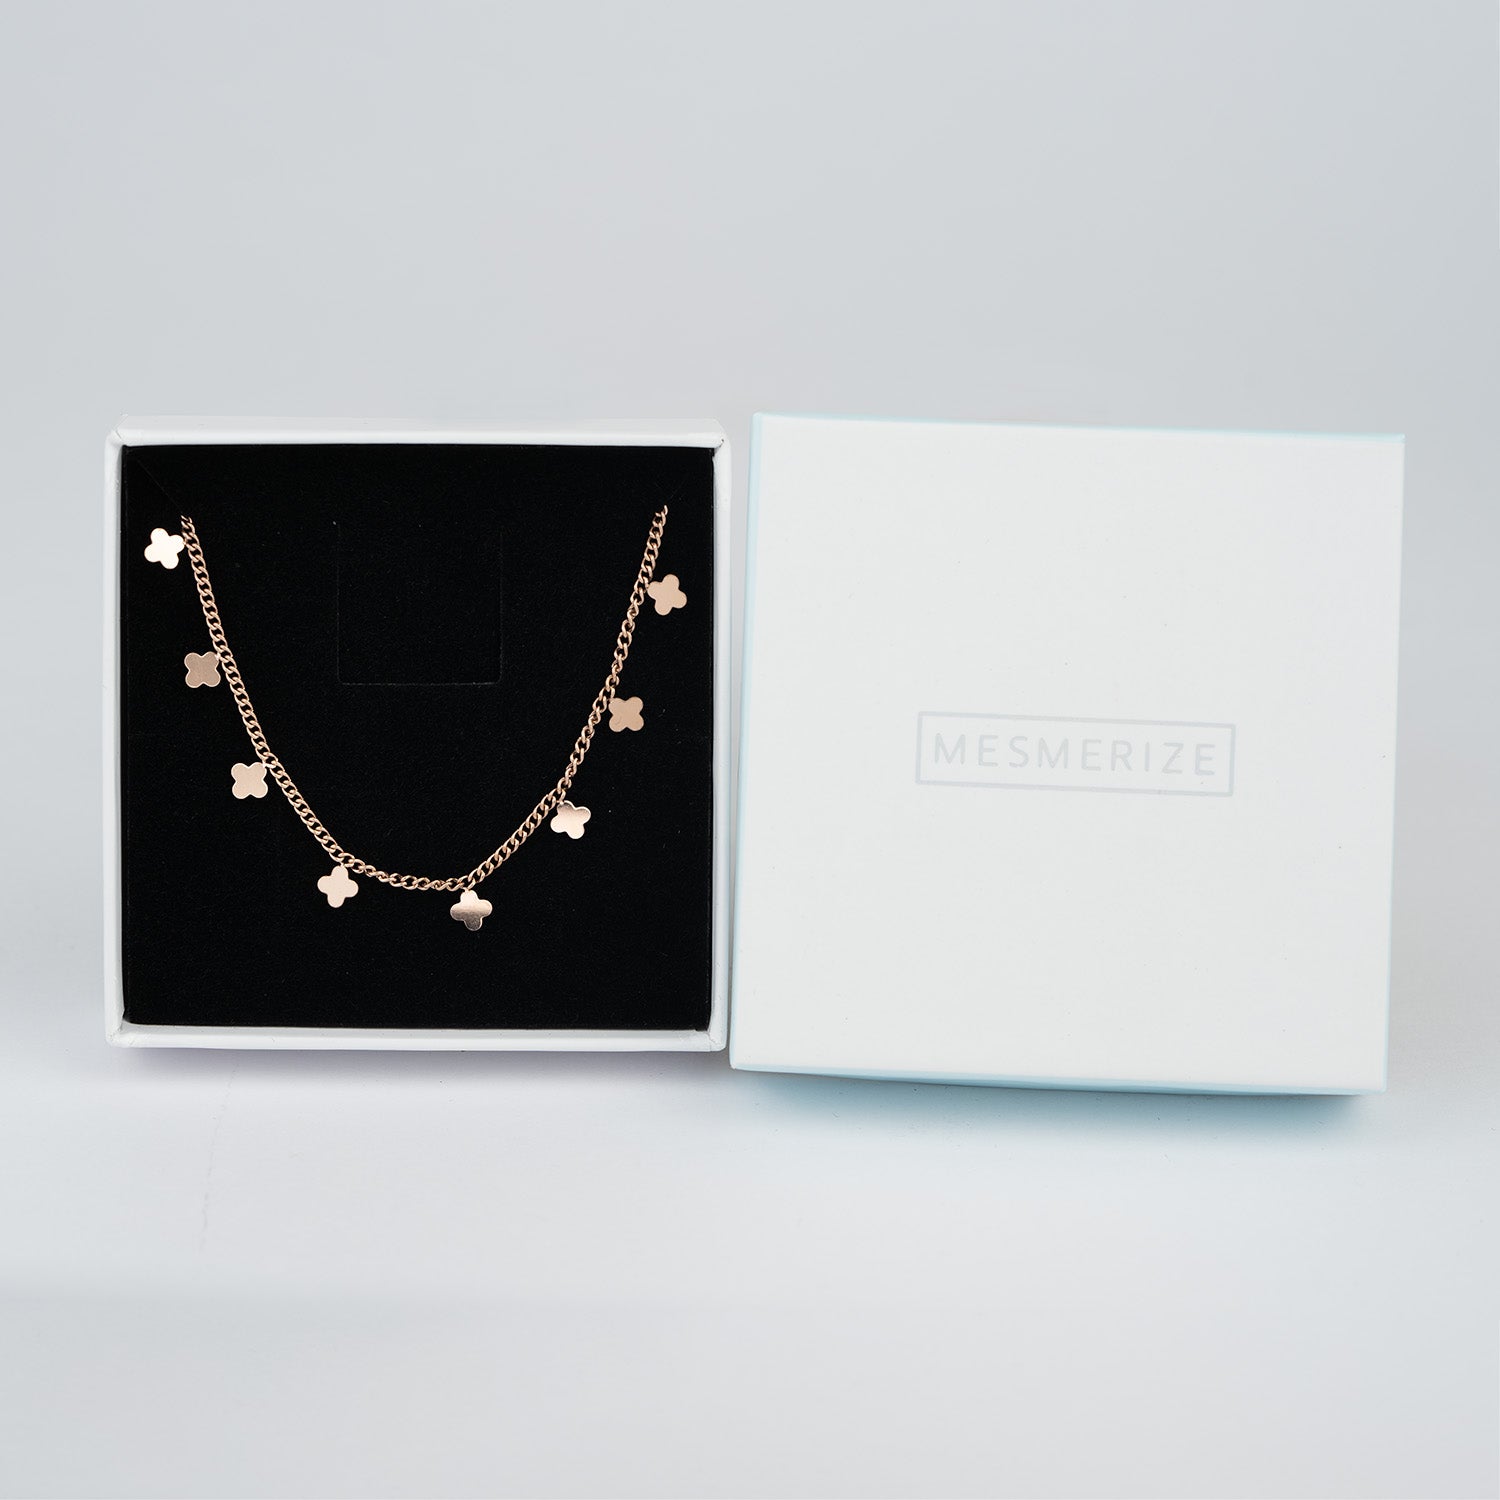 W Premium Jewellery Necklace Dainty Clover Rose Gold